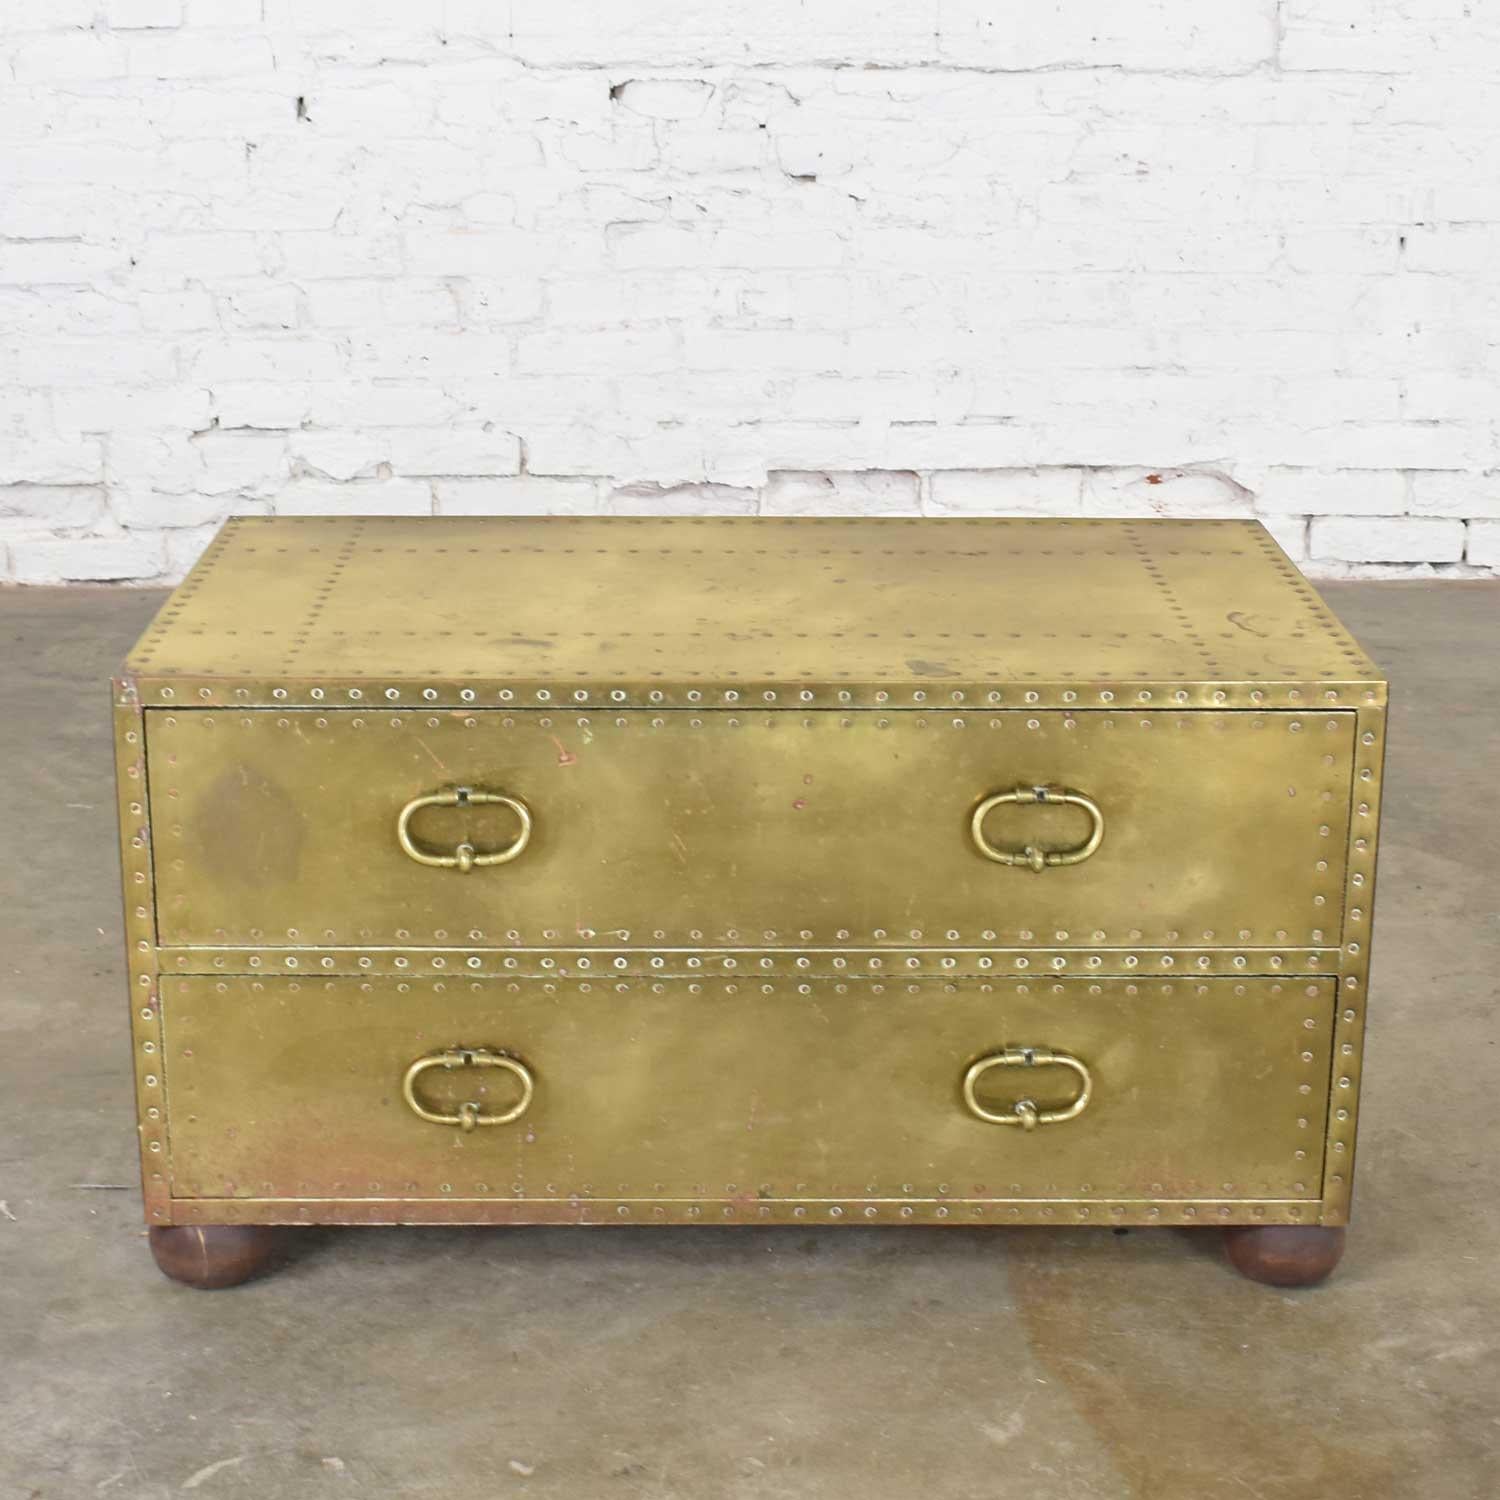 Awesome two-drawer brass-clad chest in a Hollywood Regency Campaign style by Sarreid Ltd., Spain. It is in wonderful vintage condition with a beautiful age patina to the brass including dings, dents, and color differences. The original wood bun feet